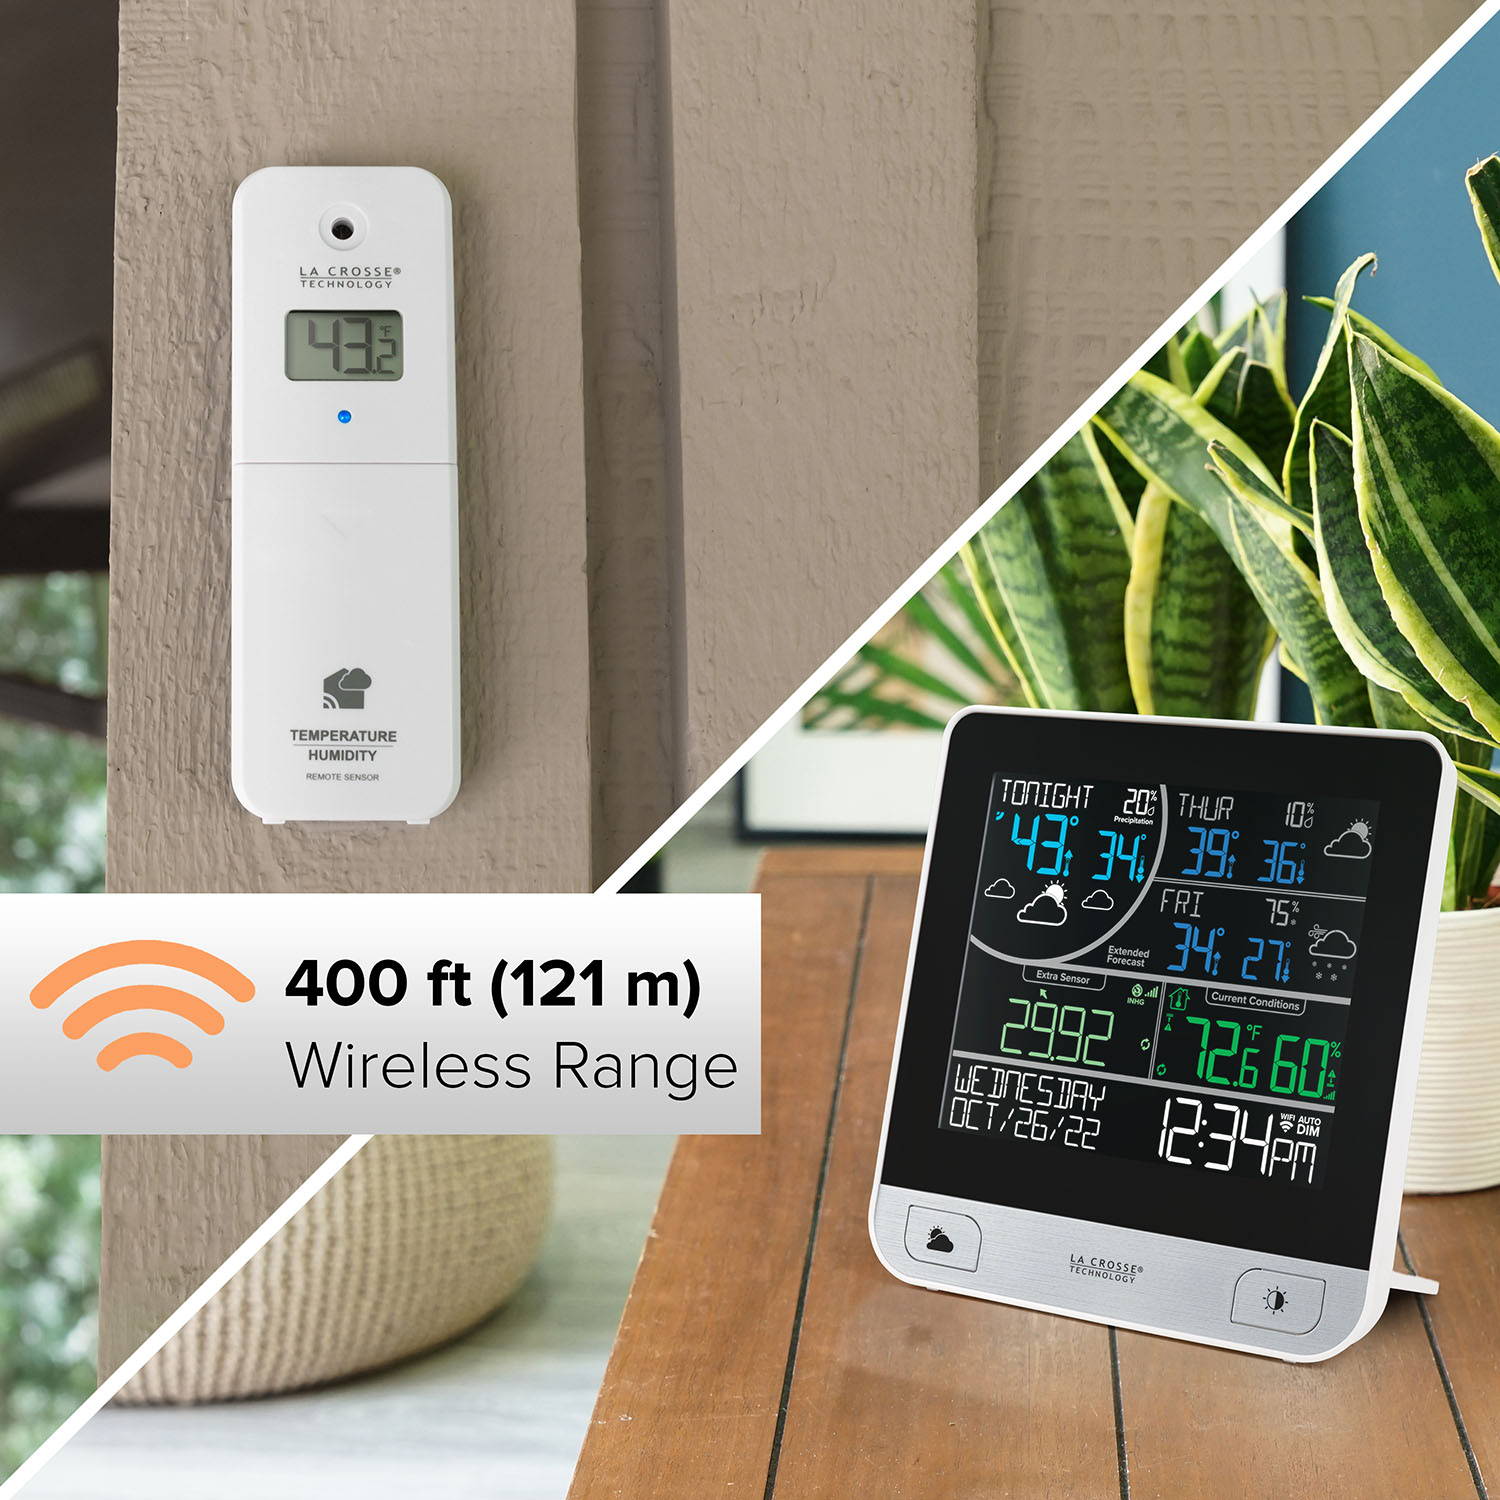 The V15 Wi-Fi Multi-Day Forecast Station comes with a wireless outdoor temperature and humidity sensor that has a 400 foot (121 meter) range.